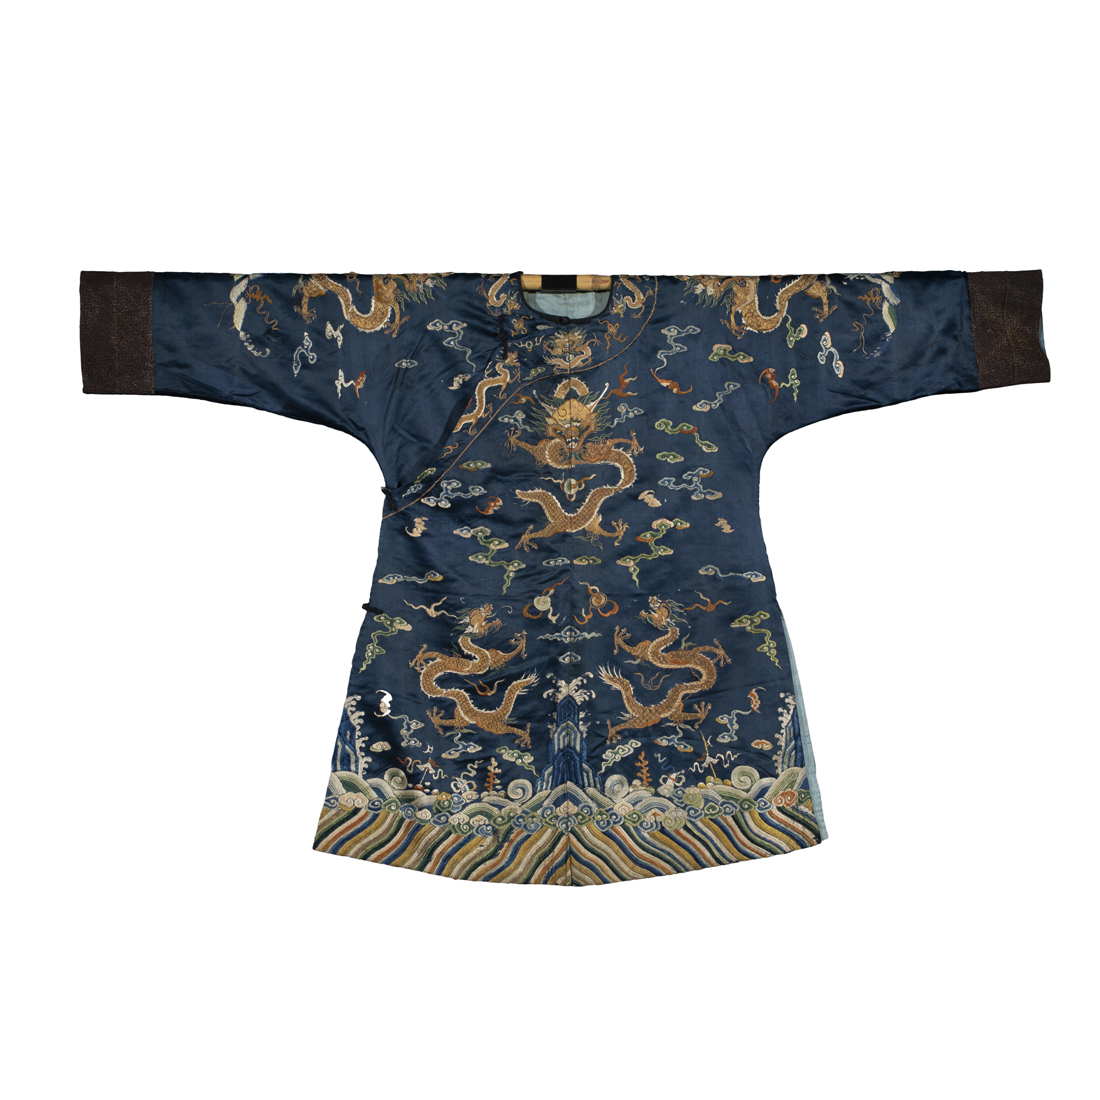 CHINESE EMBROIDERED BLUE GROUND 3a1584